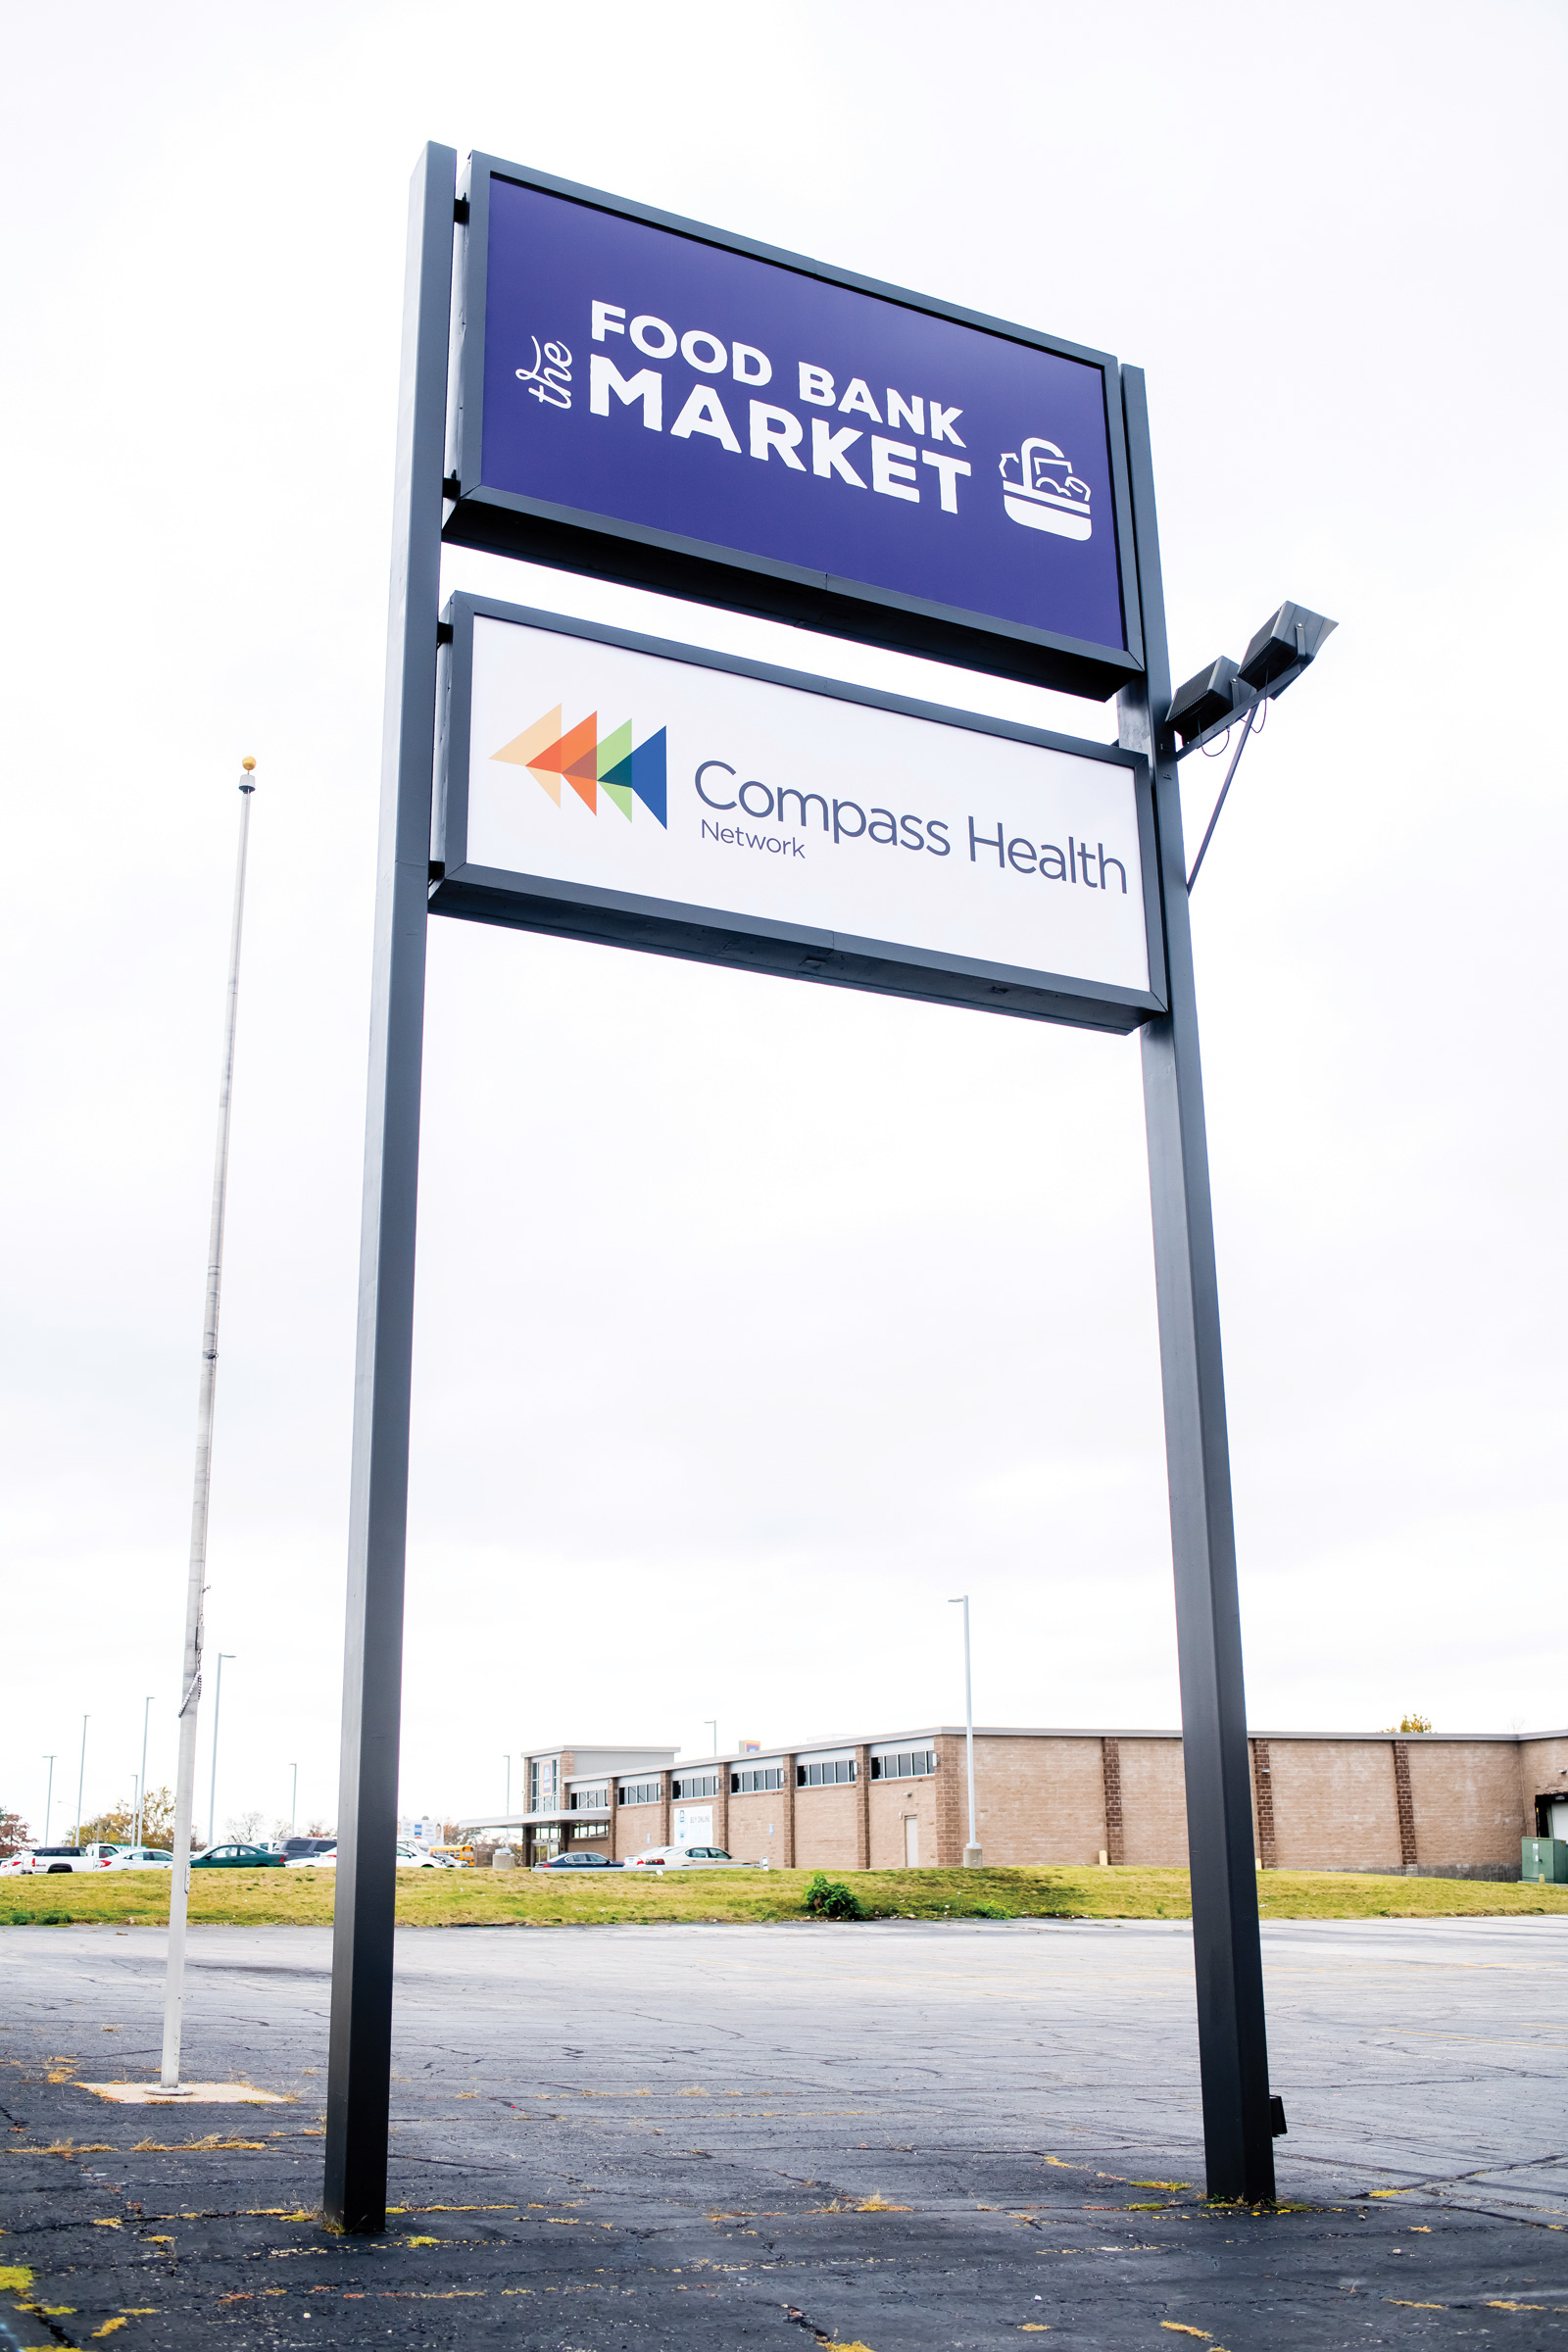 The Food Bank Market and Compass Health exterior signage